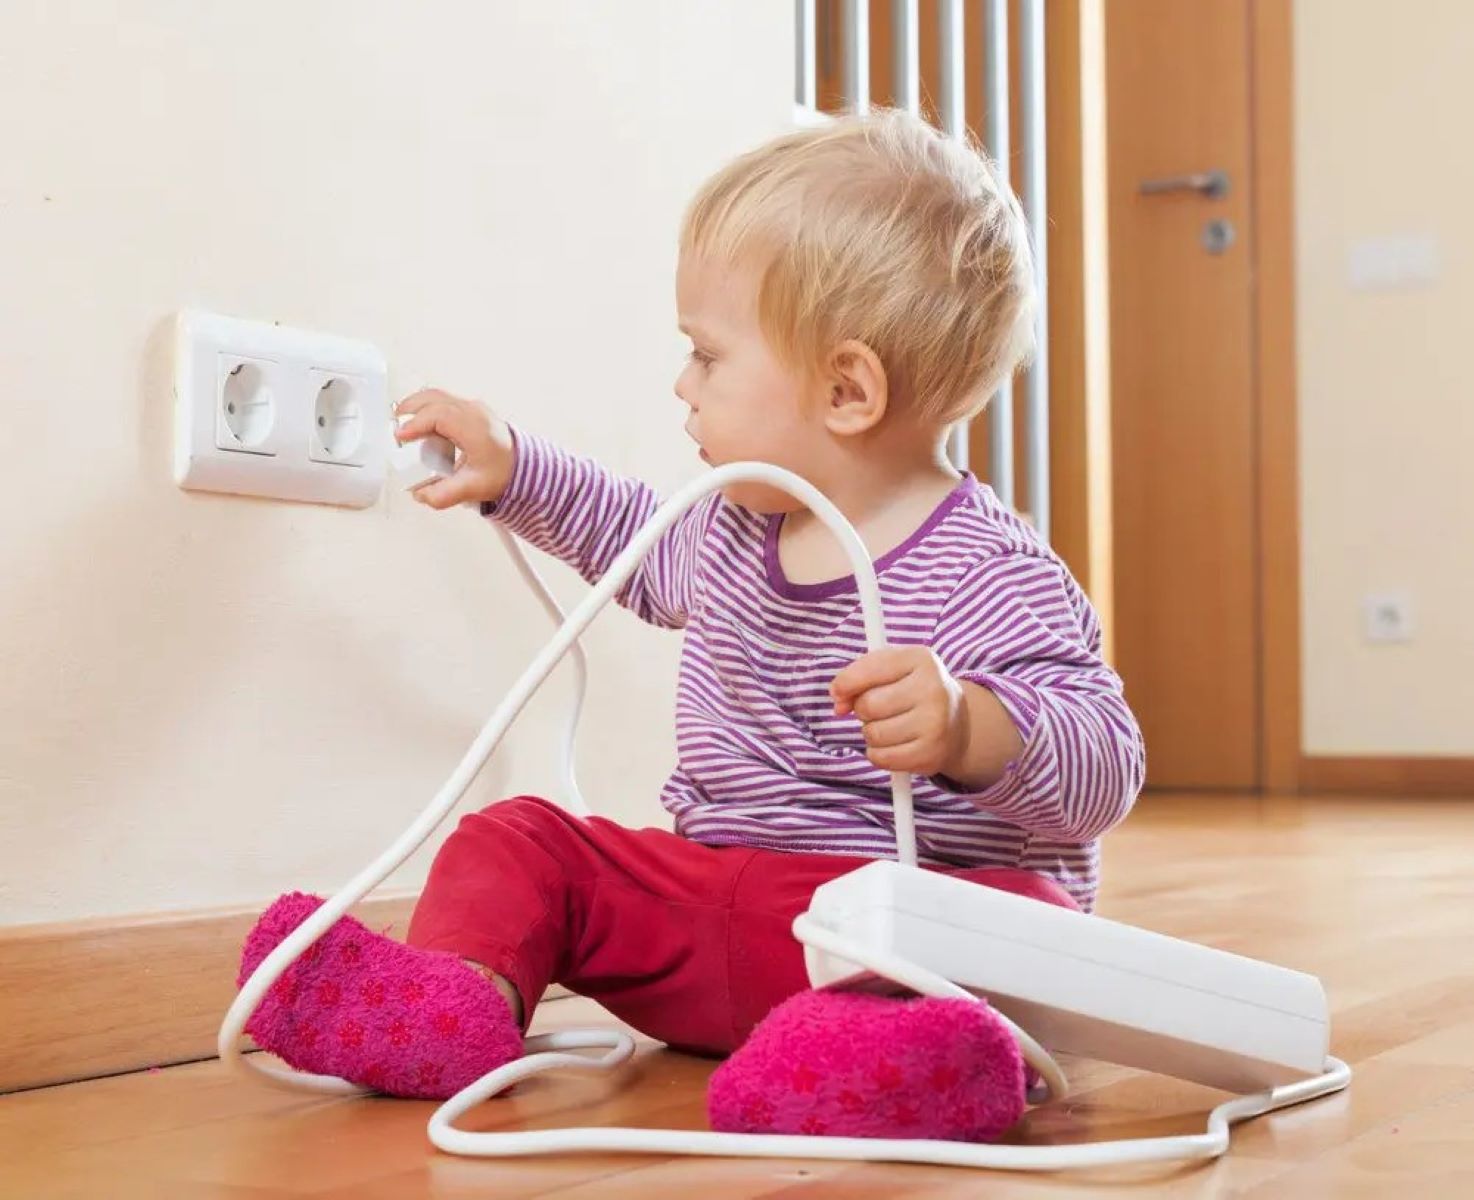 How To Use A Childproof Outlet